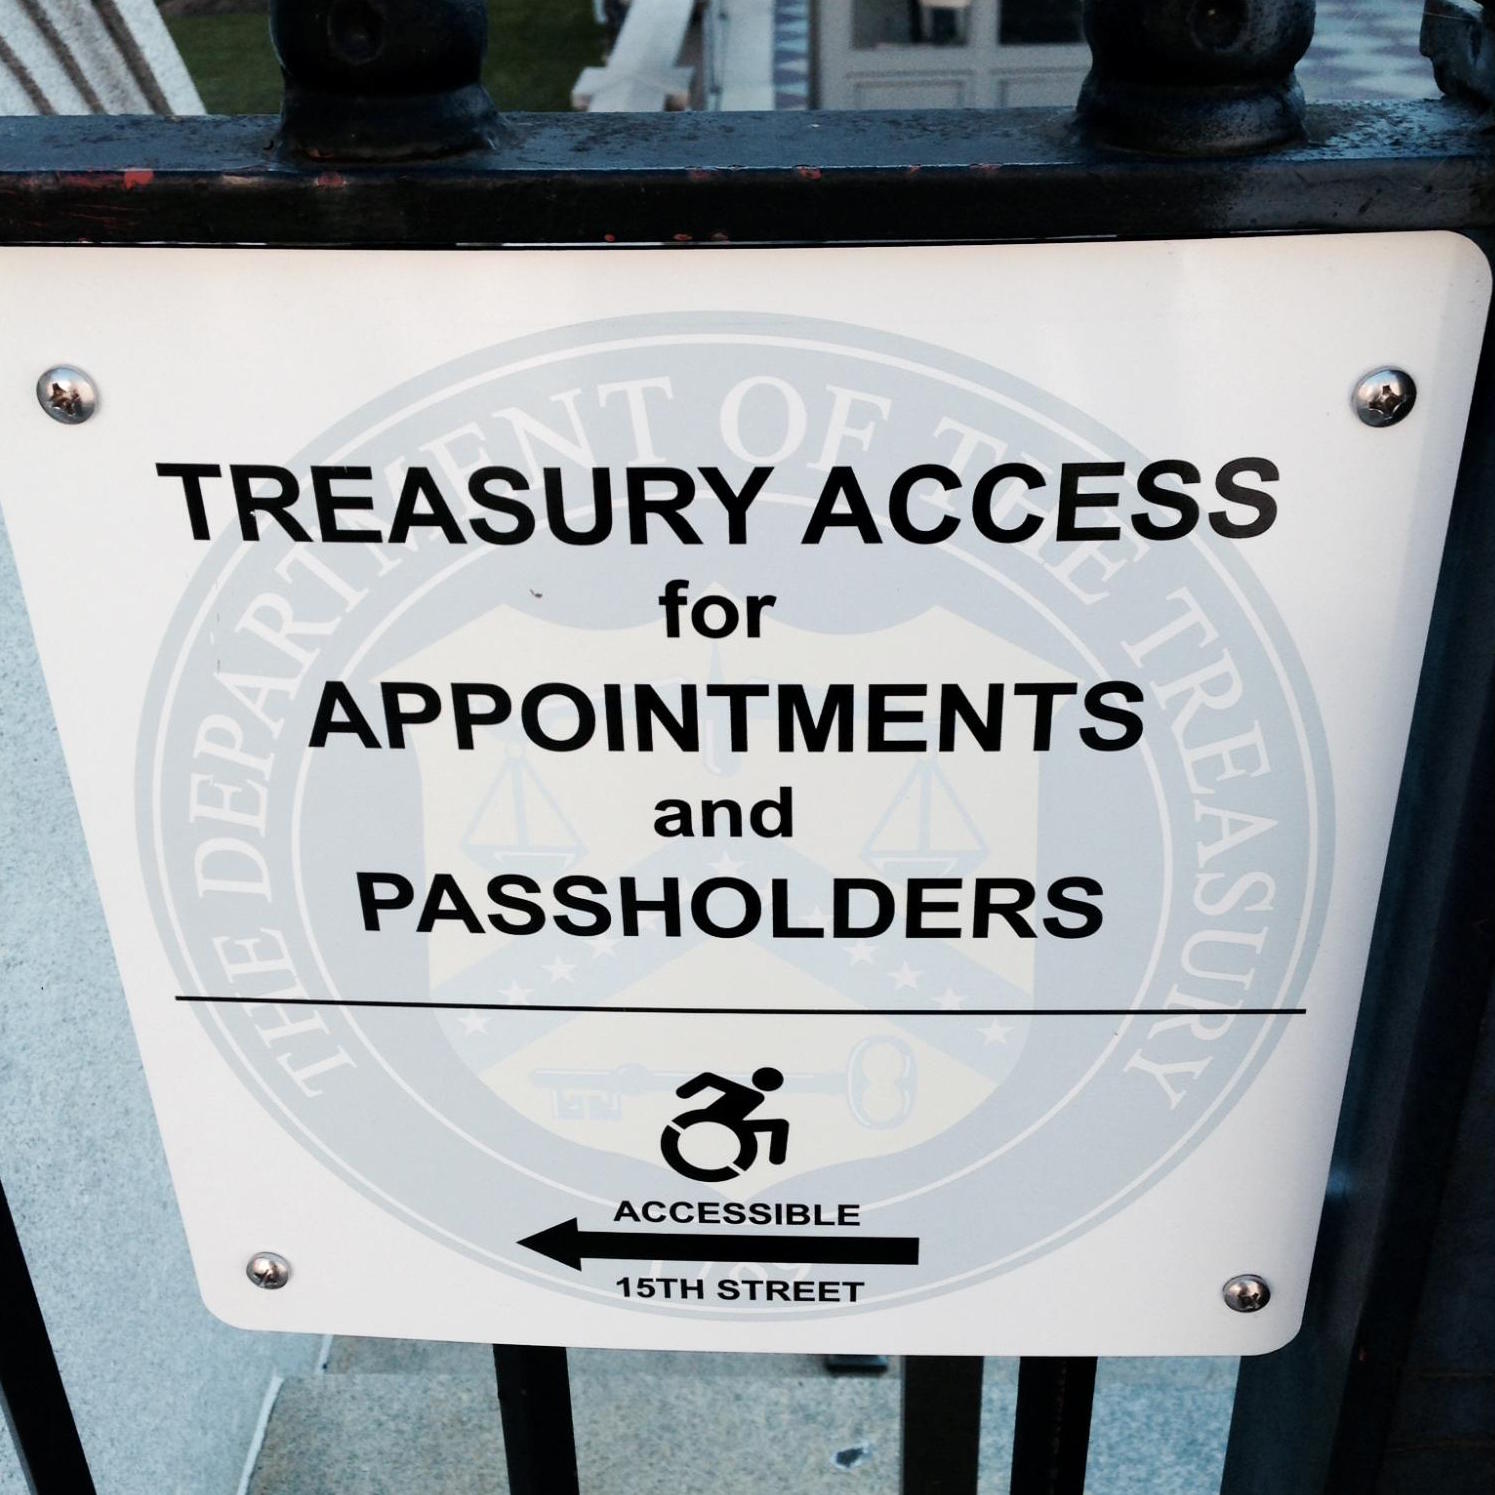 The icon now appears in formal settings, even the U.S. Department of the Treasury!